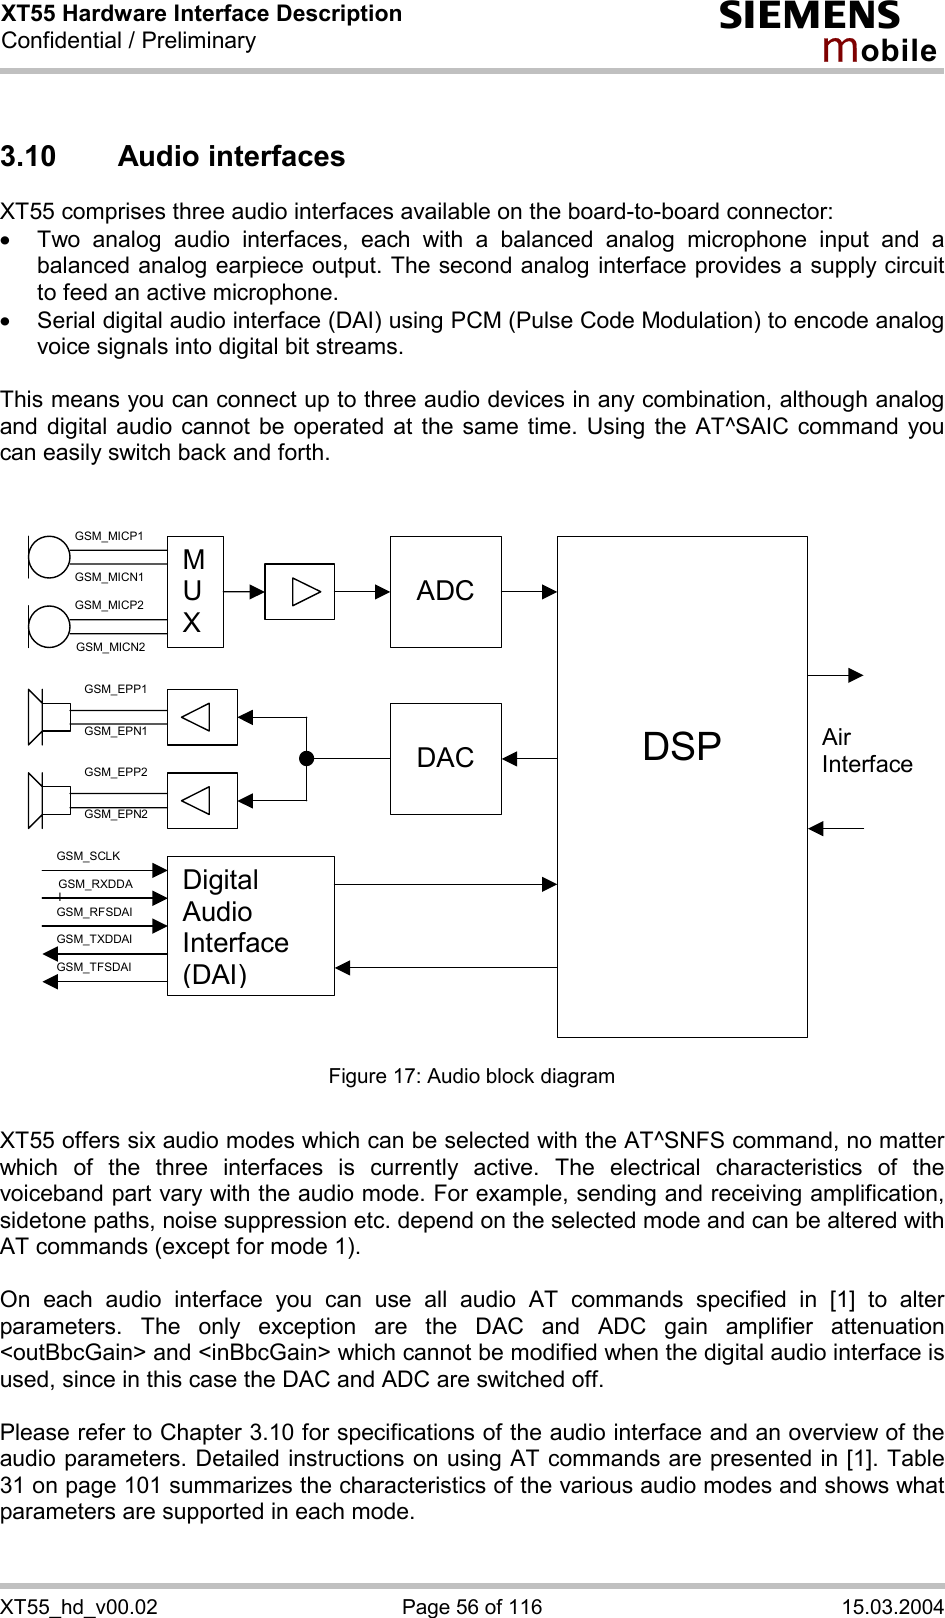 XT55 Hardware Interface Description Confidential / Preliminary s mo b i l e XT55_hd_v00.02  Page 56 of 116  15.03.2004 3.10 Audio interfaces XT55 comprises three audio interfaces available on the board-to-board connector:  ·  Two analog audio interfaces, each with a balanced analog microphone input and a balanced analog earpiece output. The second analog interface provides a supply circuit to feed an active microphone. ·  Serial digital audio interface (DAI) using PCM (Pulse Code Modulation) to encode analog voice signals into digital bit streams.  This means you can connect up to three audio devices in any combination, although analog and digital audio cannot be operated at the same time. Using the AT^SAIC command you can easily switch back and forth.    M U X  ADC     DSP  DACAir InterfaceDigital Audio Interface (DAI)      GSM_MICP1      GSM_MICN1      GSM_MICP2 GSM_MICN2 GSM_EPP1 GSM_EPN1 GSM_EPP2 GSM_EPN2 GSM_SCLK GSM_RXDDAI GSM_TFSDAI GSM_RFSDAI GSM_TXDDAI  Figure 17: Audio block diagram  XT55 offers six audio modes which can be selected with the AT^SNFS command, no matter which of the three interfaces is currently active. The electrical characteristics of the voiceband part vary with the audio mode. For example, sending and receiving amplification, sidetone paths, noise suppression etc. depend on the selected mode and can be altered with AT commands (except for mode 1).  On each audio interface you can use all audio AT commands specified in [1] to alter parameters. The only exception are the DAC and ADC gain amplifier attenuation &lt;outBbcGain&gt; and &lt;inBbcGain&gt; which cannot be modified when the digital audio interface is used, since in this case the DAC and ADC are switched off.  Please refer to Chapter 3.10 for specifications of the audio interface and an overview of the audio parameters. Detailed instructions on using AT commands are presented in [1]. Table 31 on page 101 summarizes the characteristics of the various audio modes and shows what parameters are supported in each mode.  